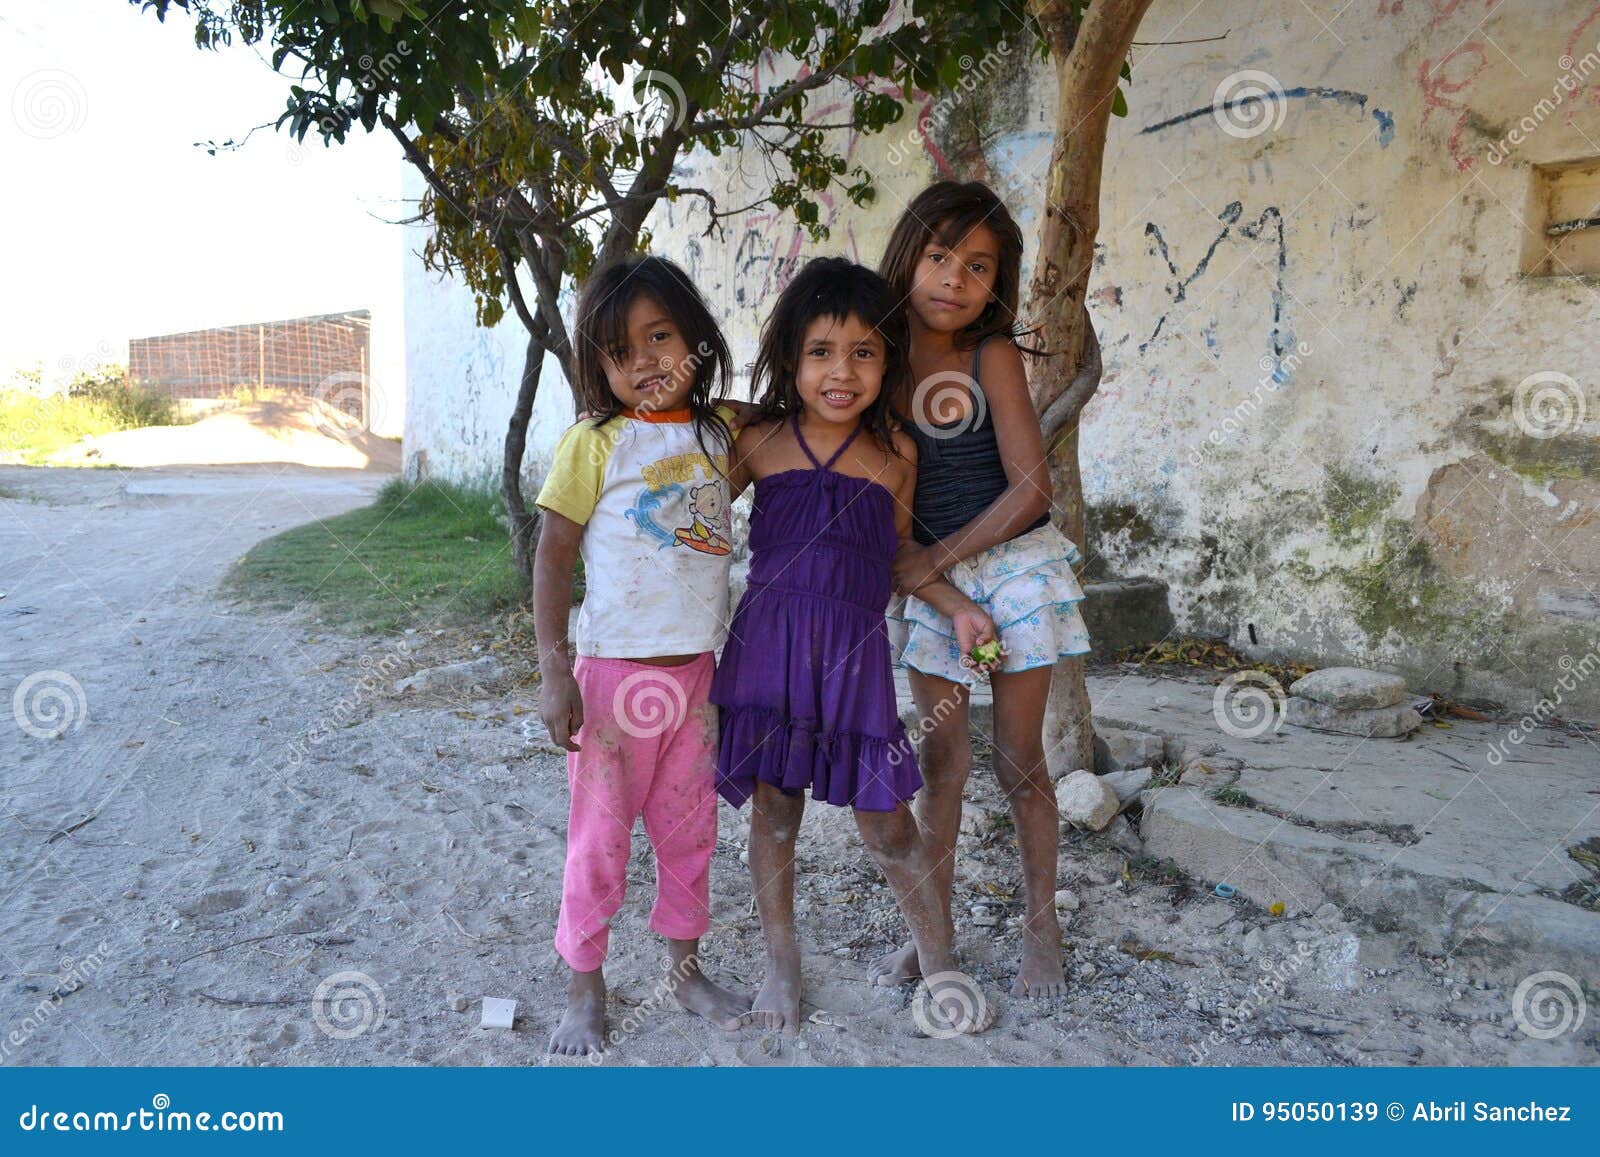 mexican-girls-playing-barefoot-zapopan-jalisco-mexico-95050139